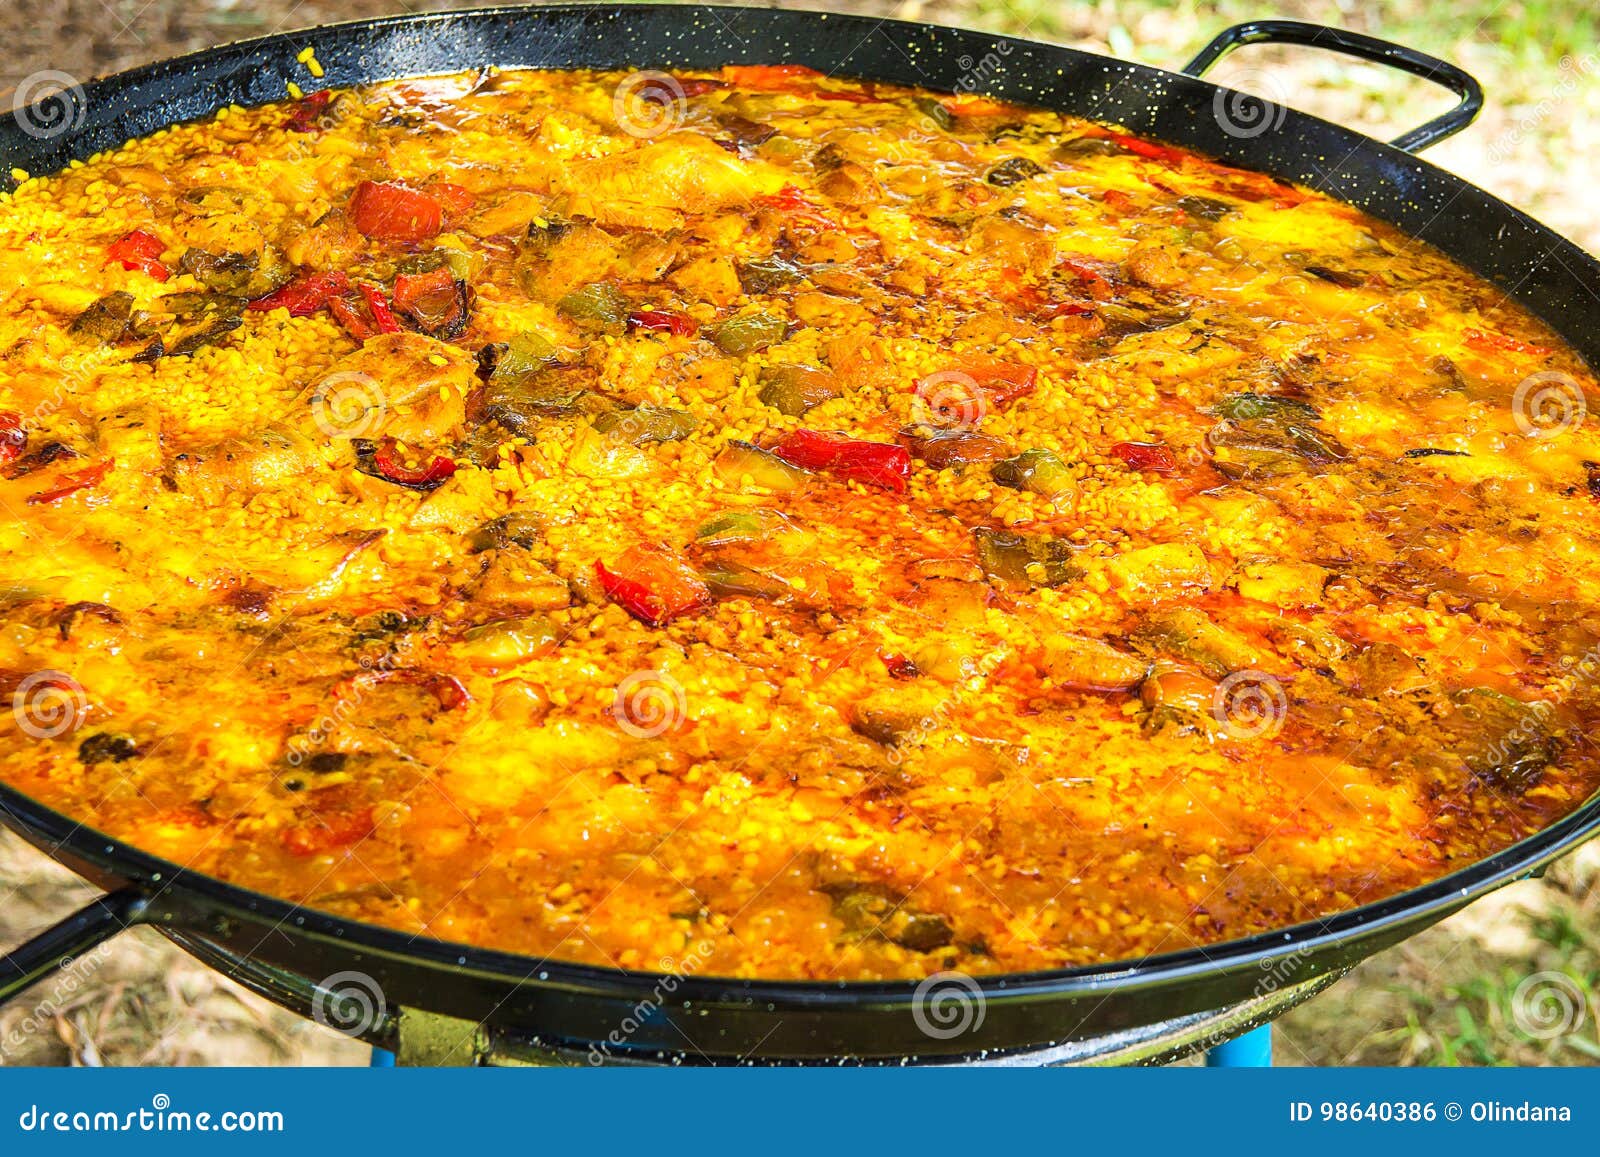 home cooked spanish valencian paella in large flat frying pan. variety of meats, vegetables, rice, tomato sauce.